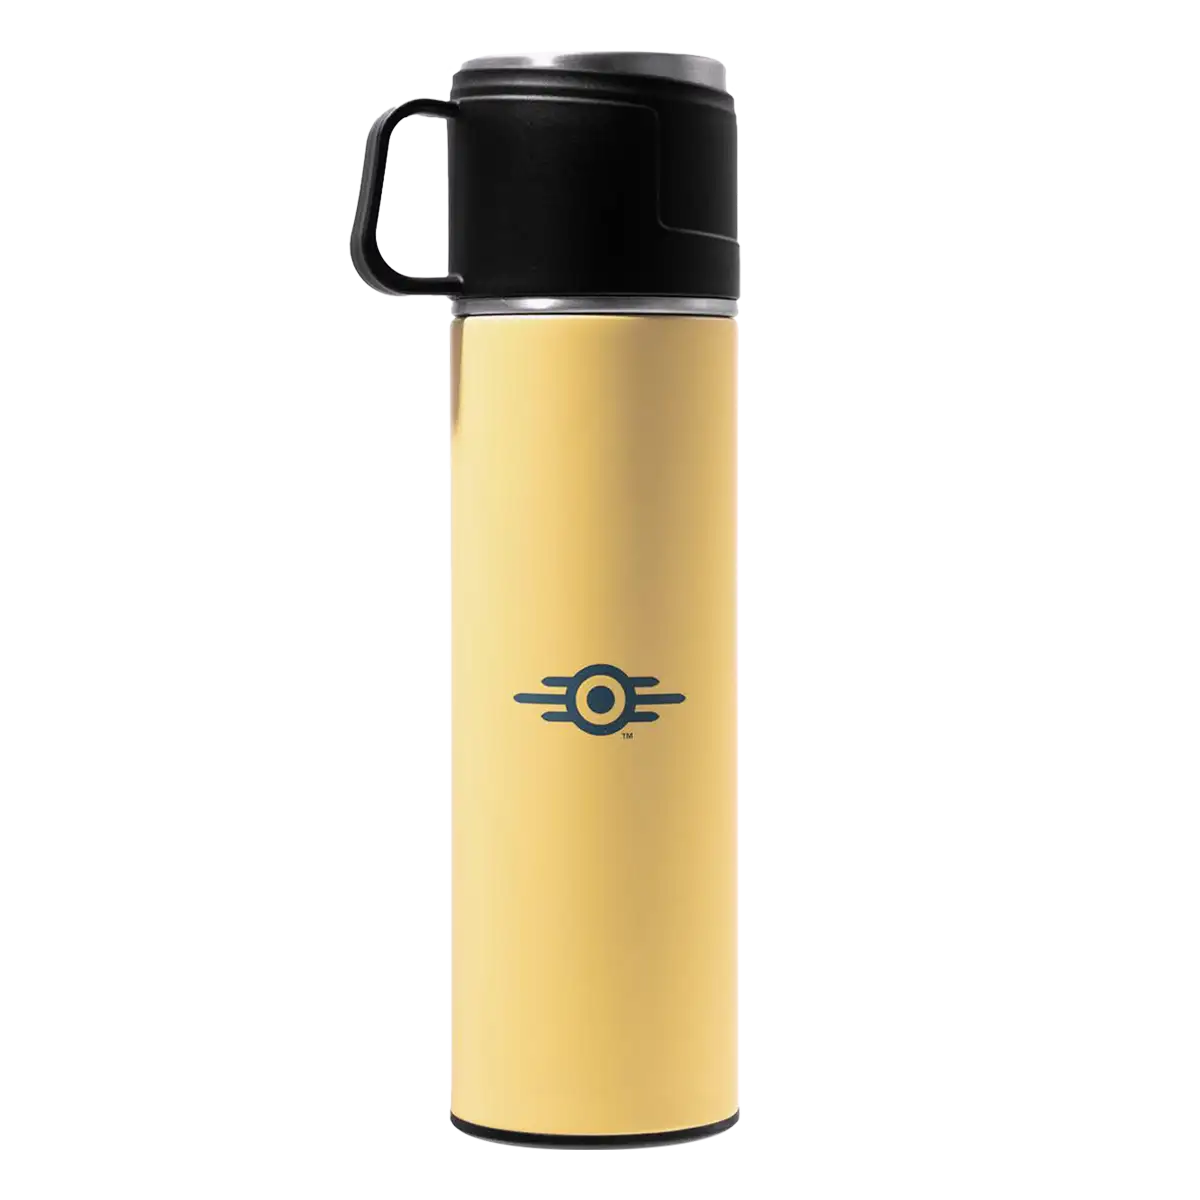 Fallout Insulated Bottle "Vault Tec" Image 2